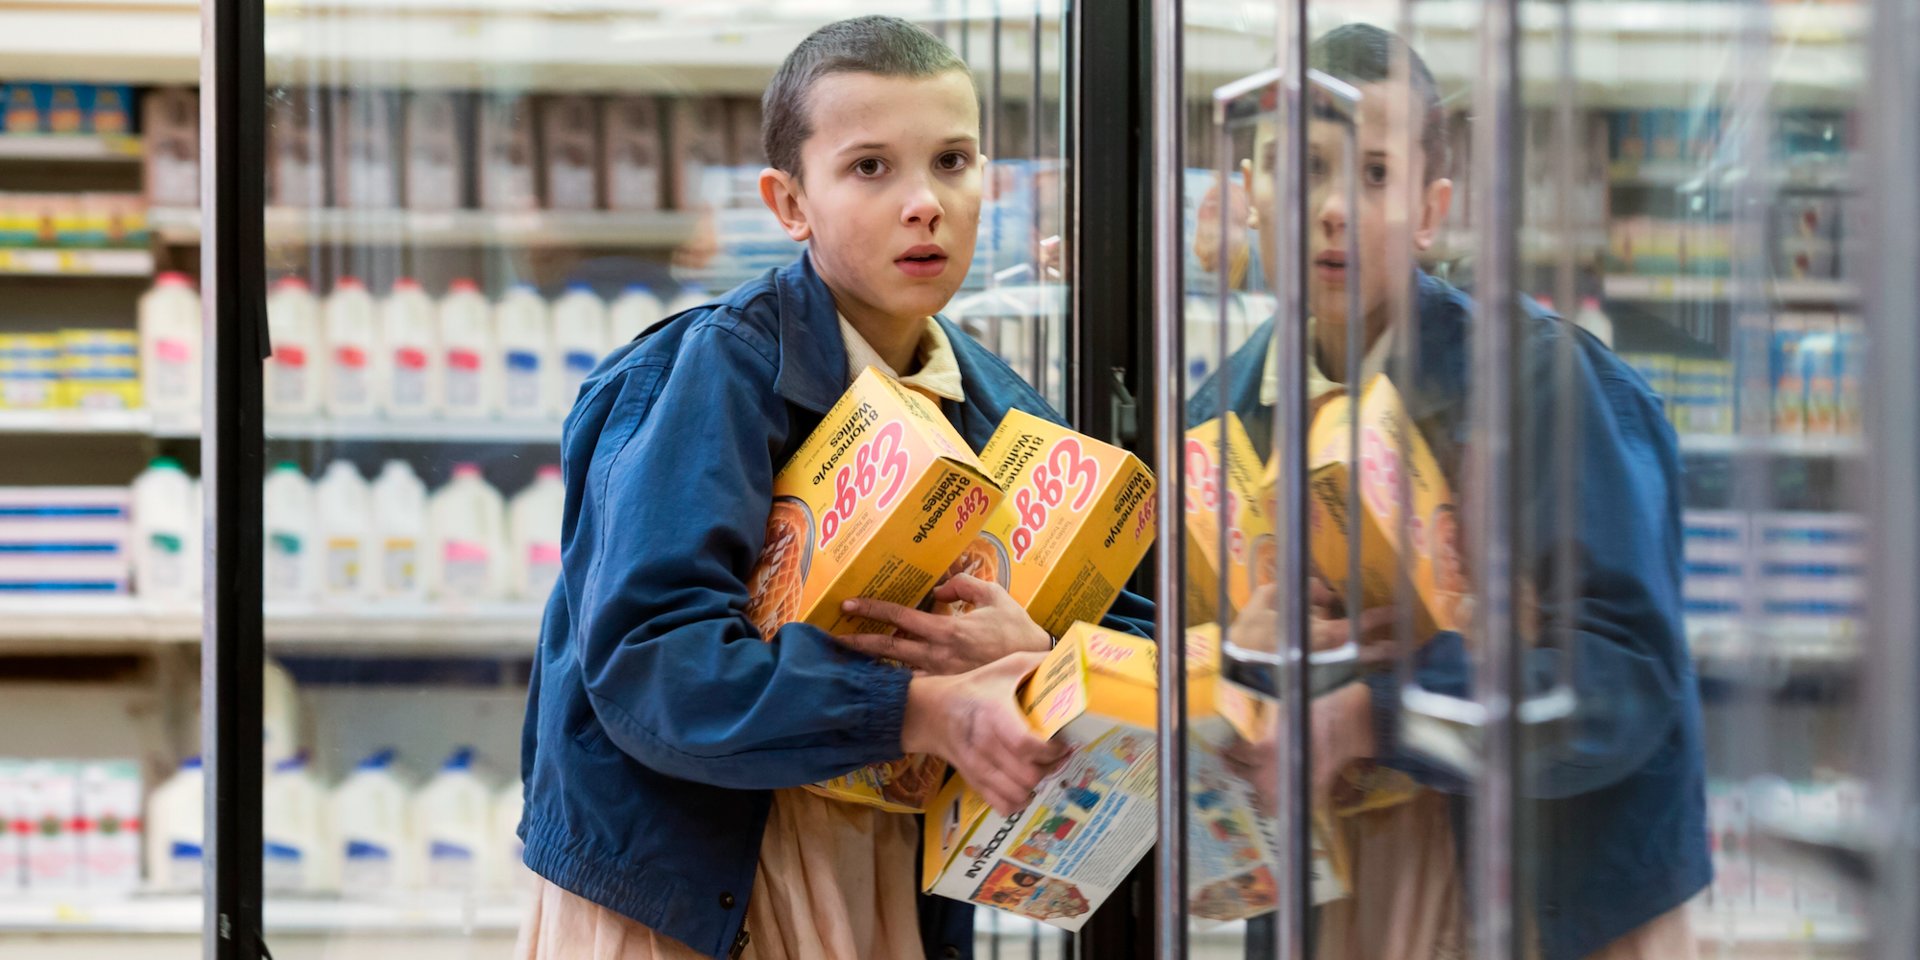 Which Two Stranger Things Characters Are You A Combo Of? Stranger Things Eleven